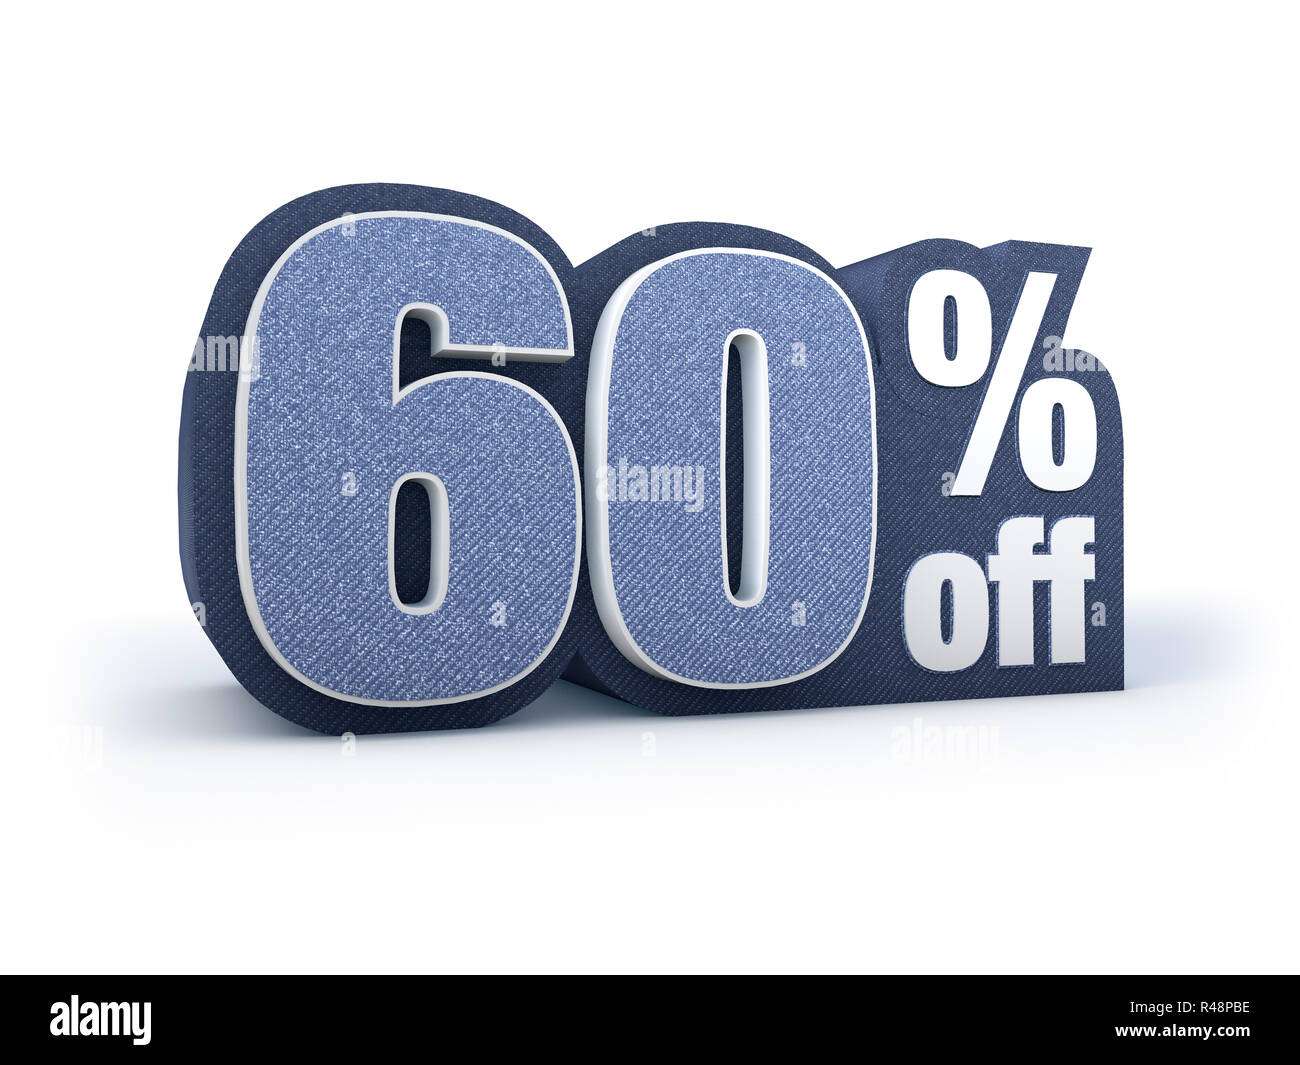 60 percent off denim styled discount price sign Stock Photo